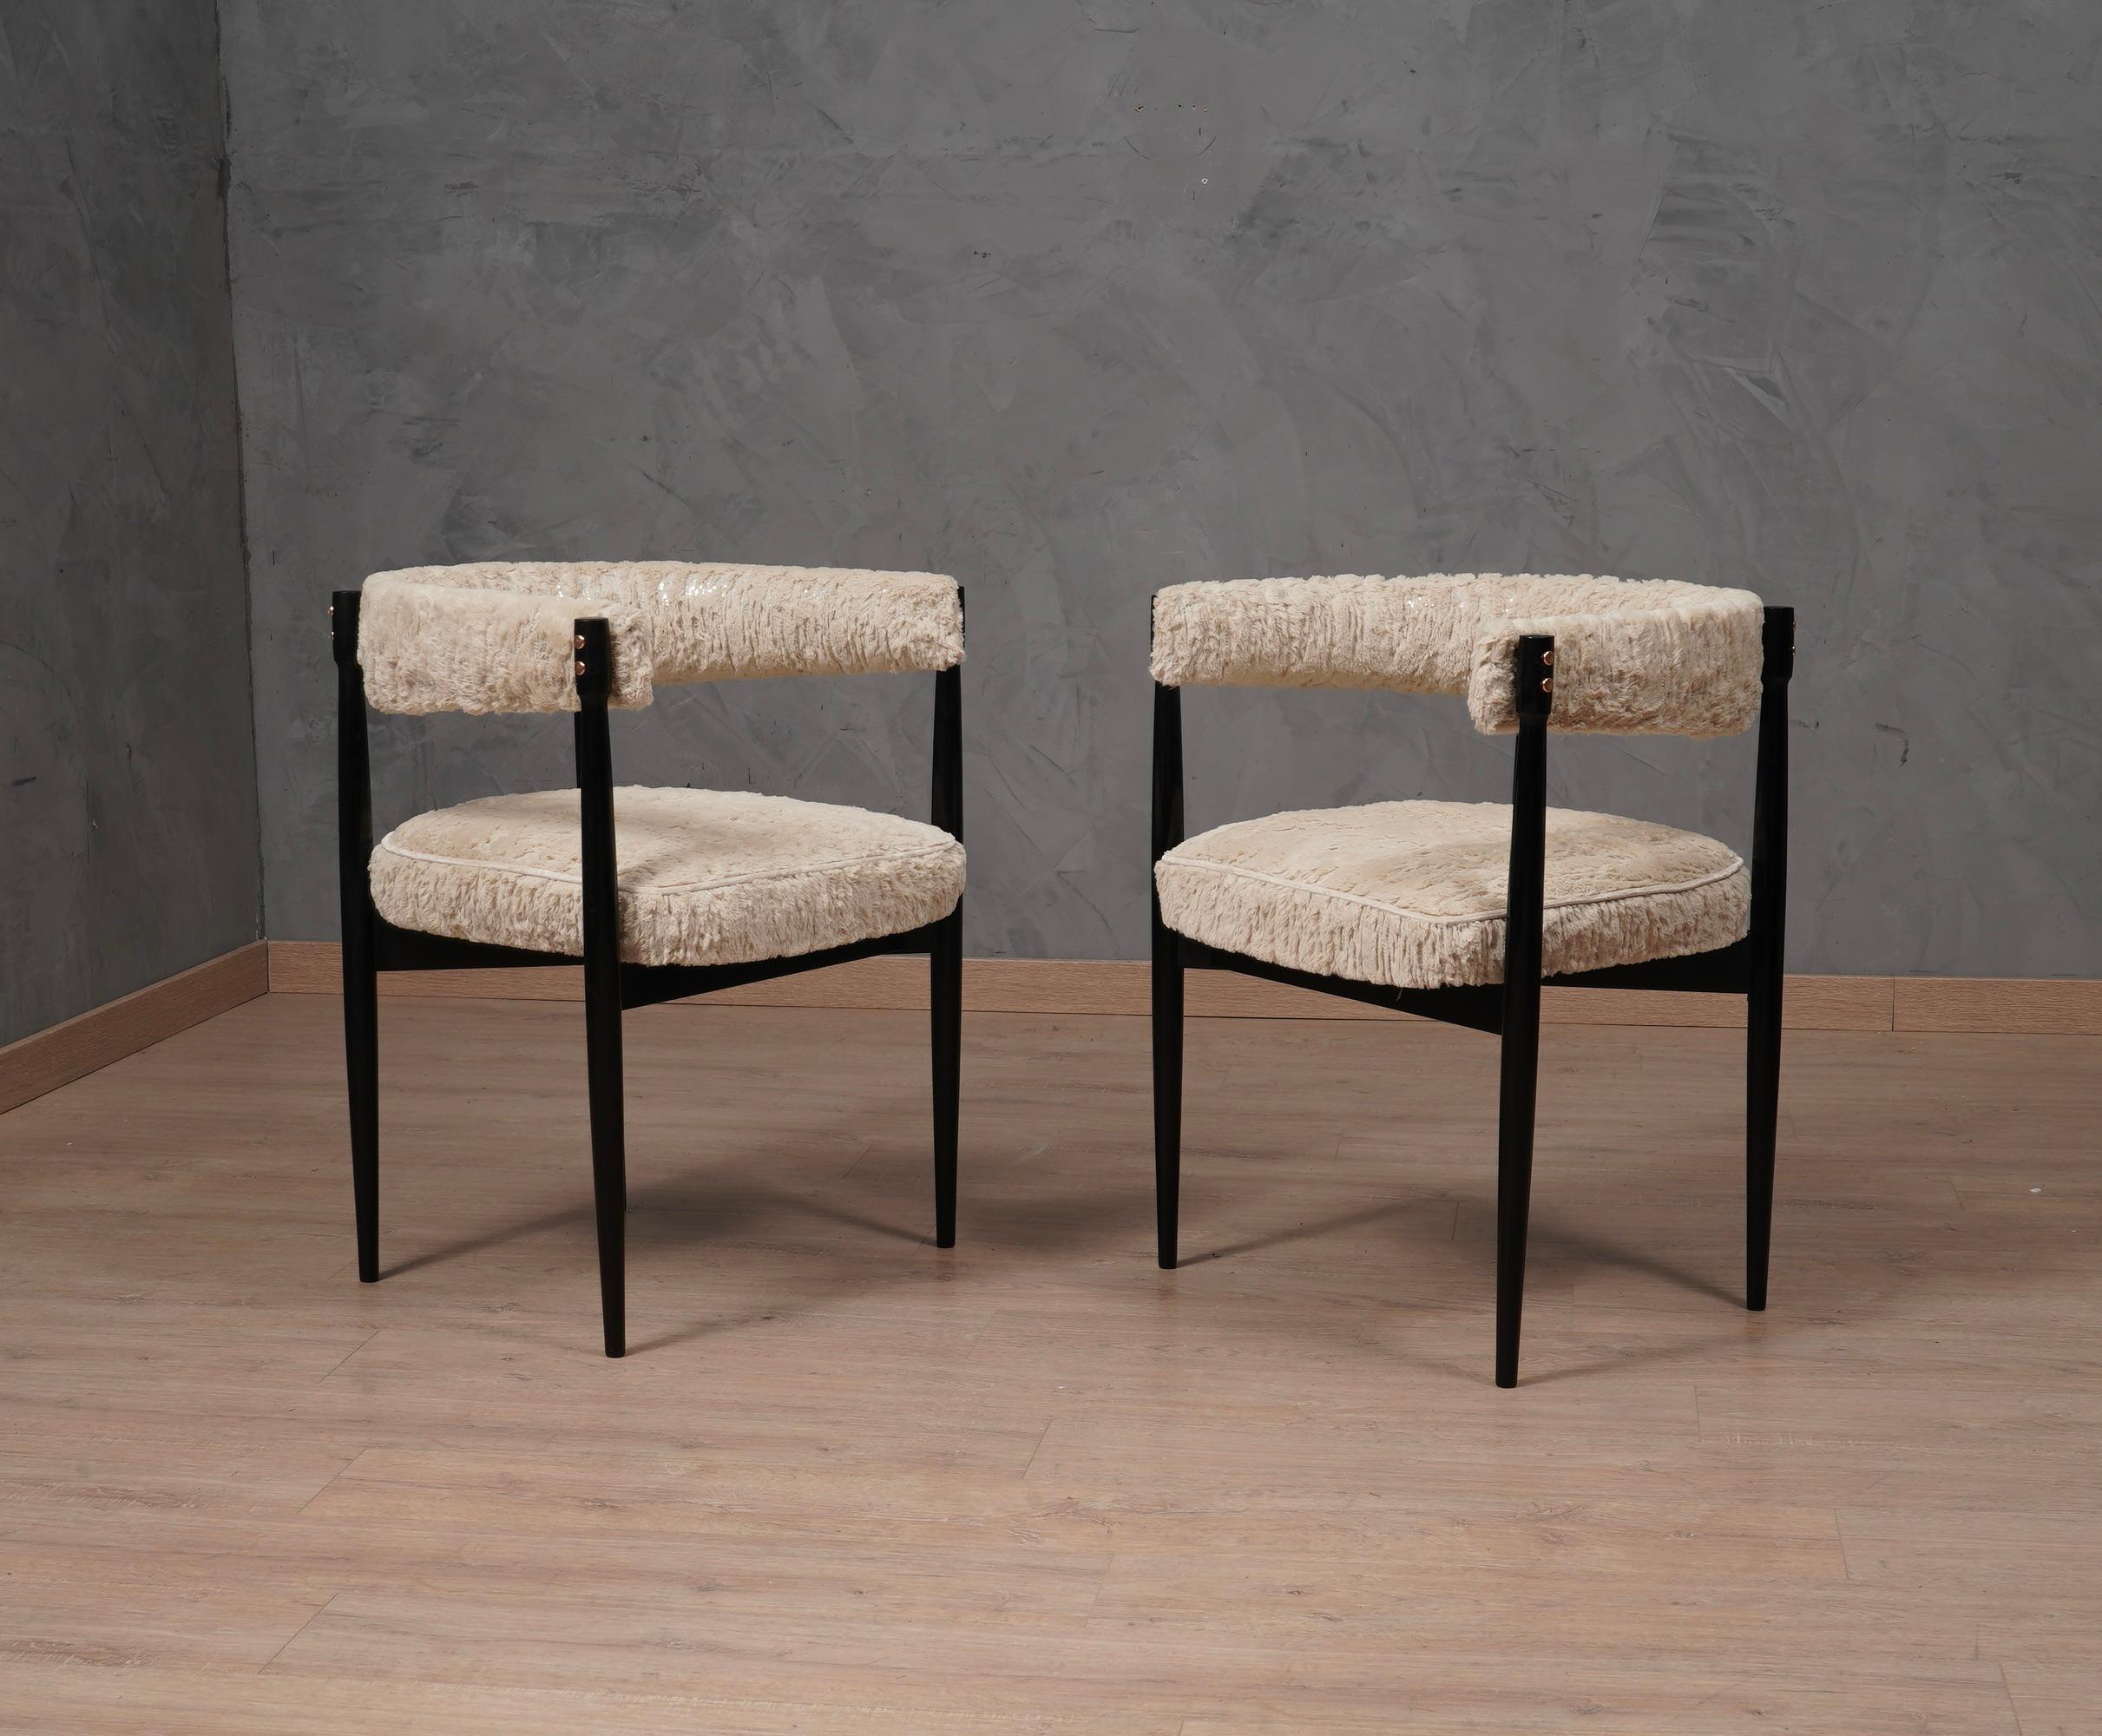 Characteristic and precious Italian armchairs in black lacquered beech, with little copper inserts, all married with a beautiful white and silver fabric.

The armchairs have a light beech wood frame, which has been well polished in black shellac.